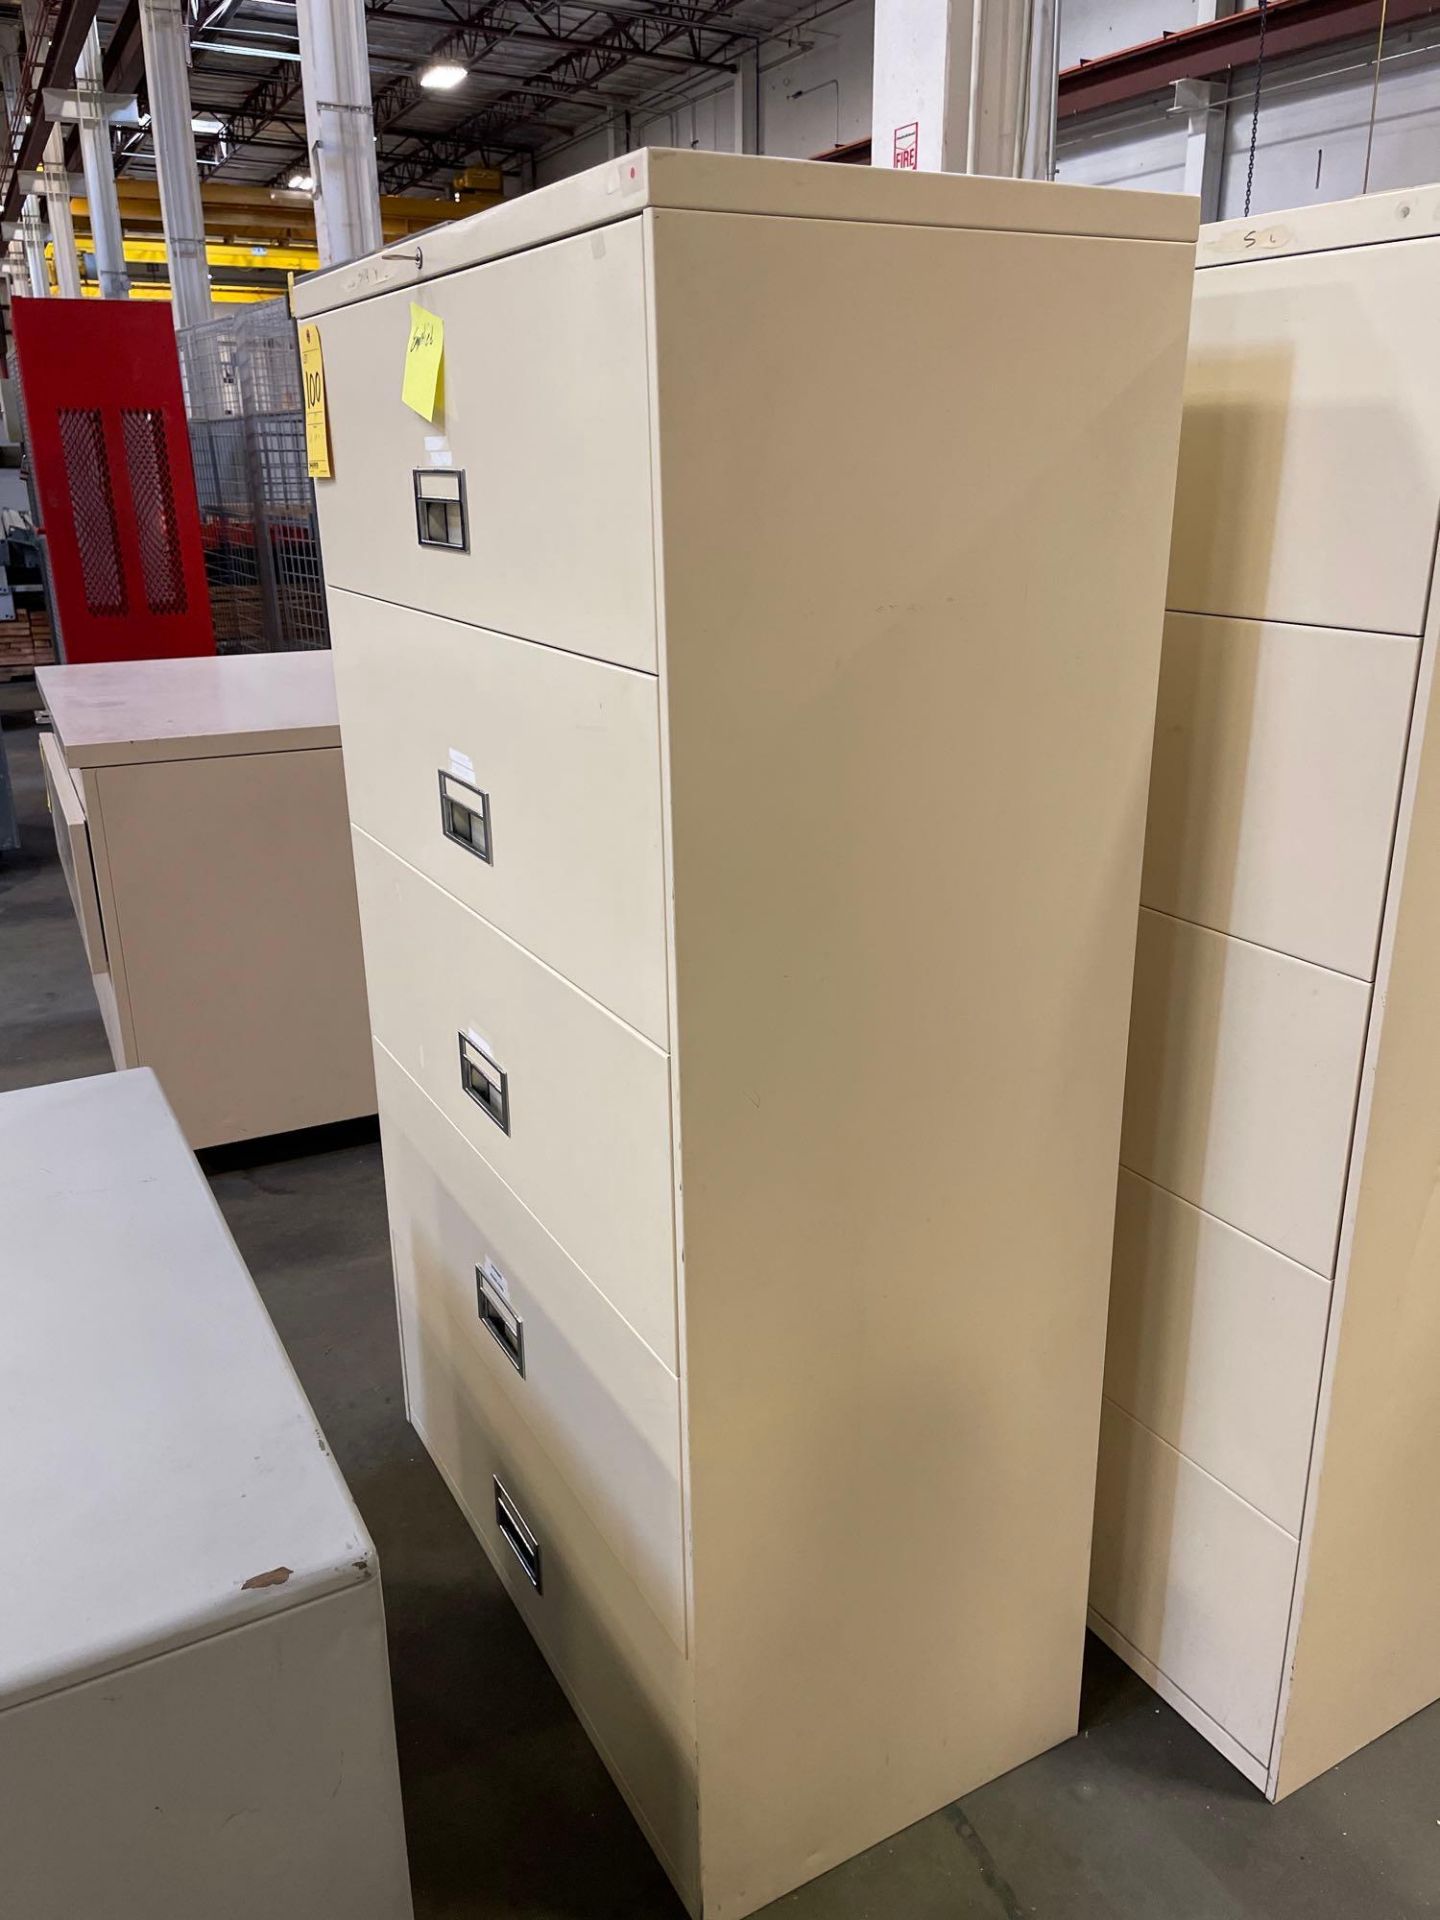 Lot of 4 5-Drawer File Cabinets: (2) 36" X 18" X 60", (1) 42" X 19" X 53", (1) 42" X 19" X 67" - Image 2 of 3